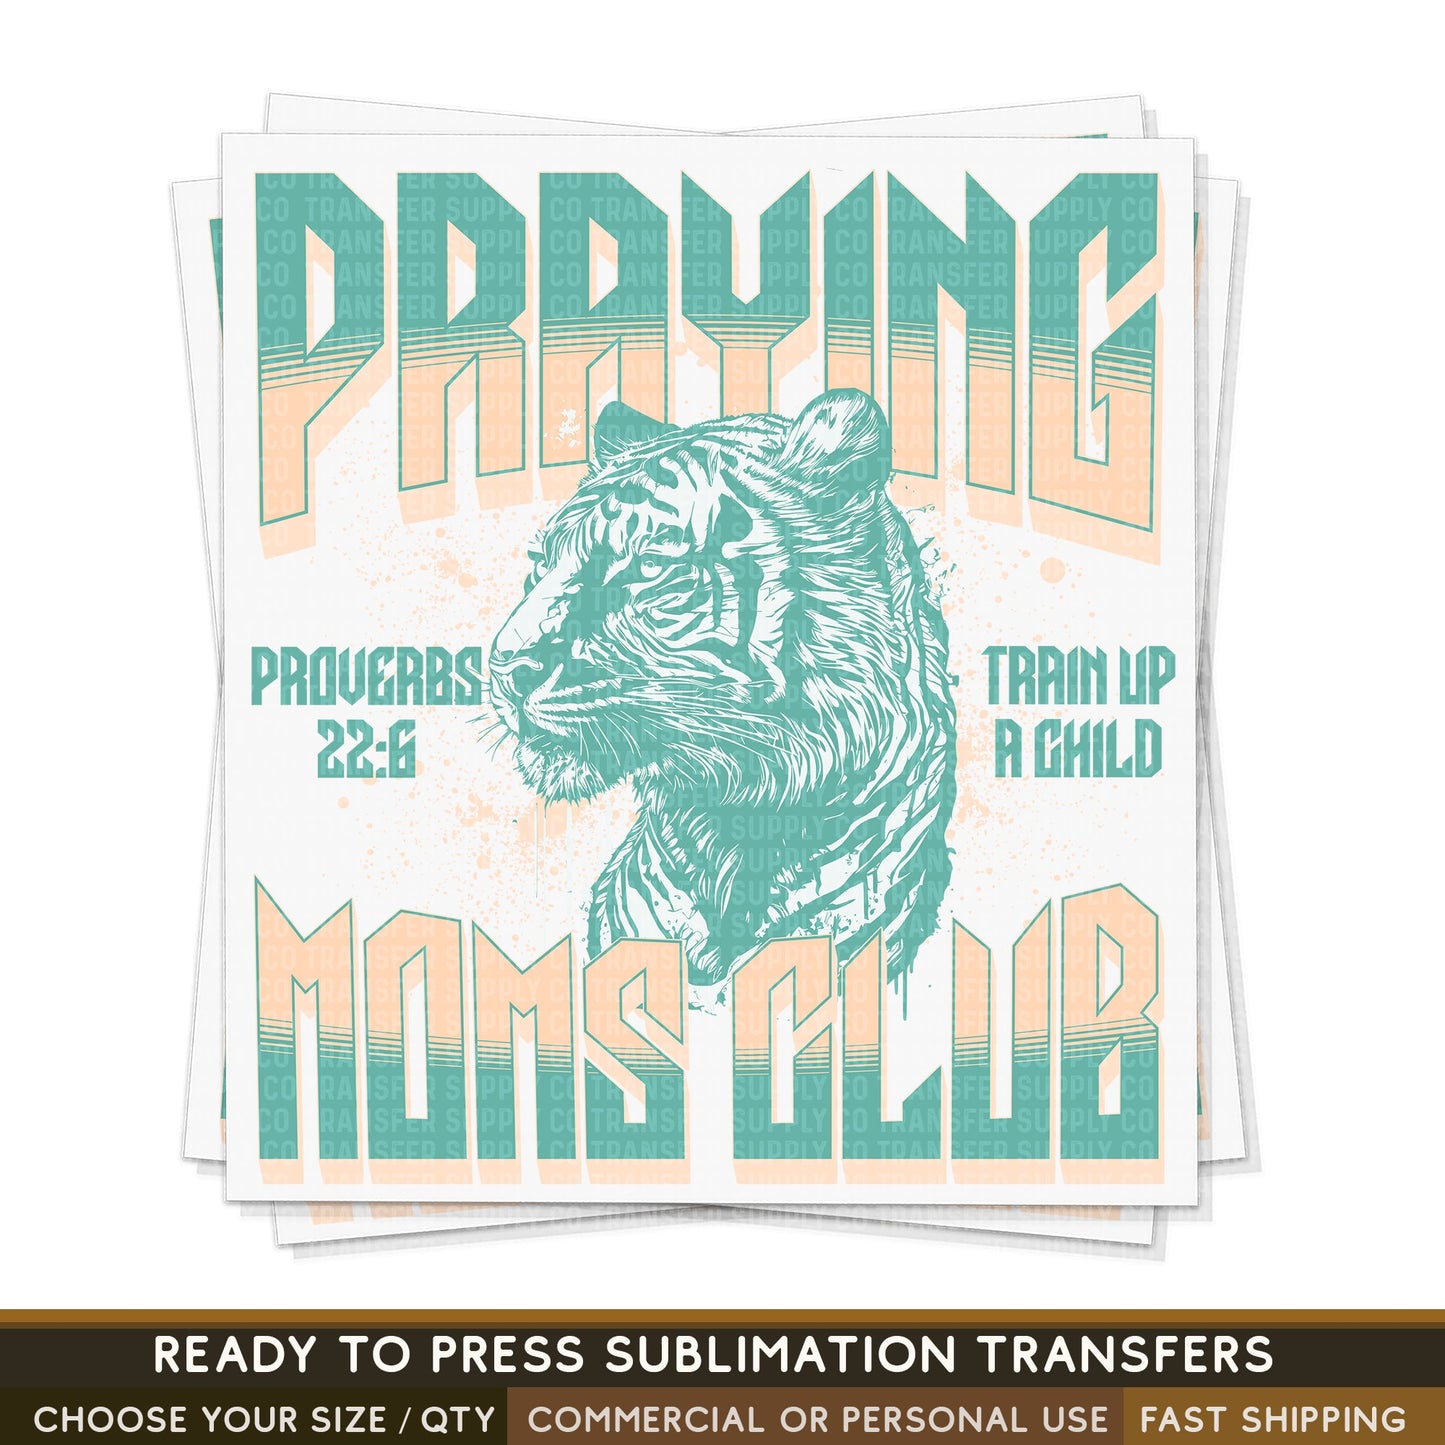 Praying Moms Club Sublimation Transfer, Religious Trendy Ready To Press Sublimation Transfers, Sublimation Prints, Sublimation Transfers